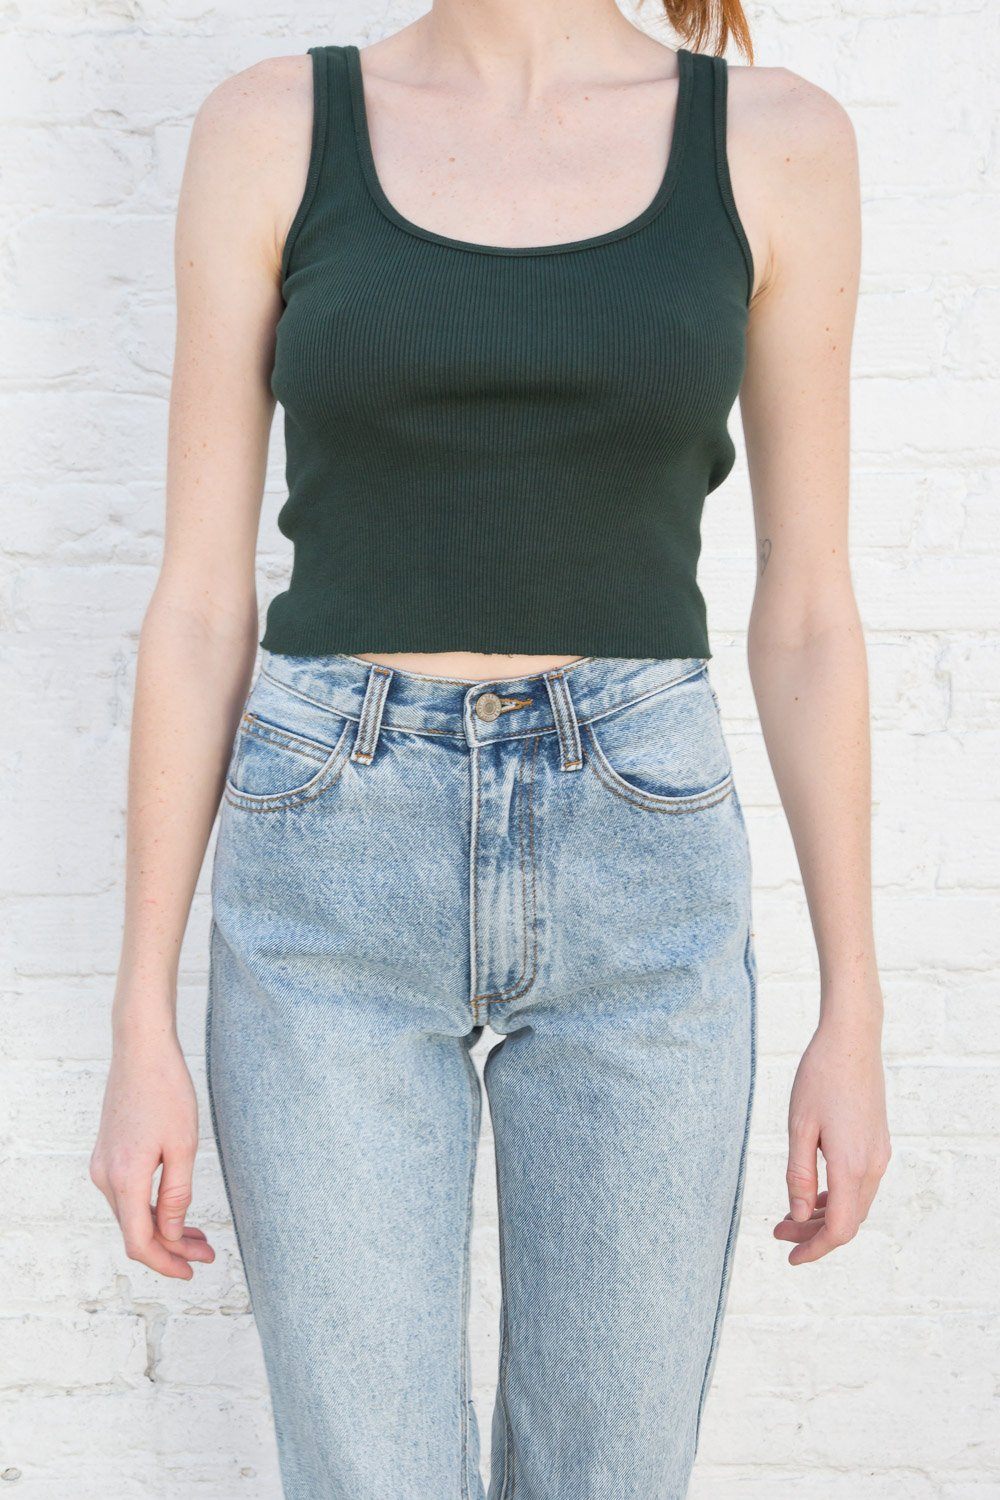 Brandy Melville ribbed cropped tank top, No tag for